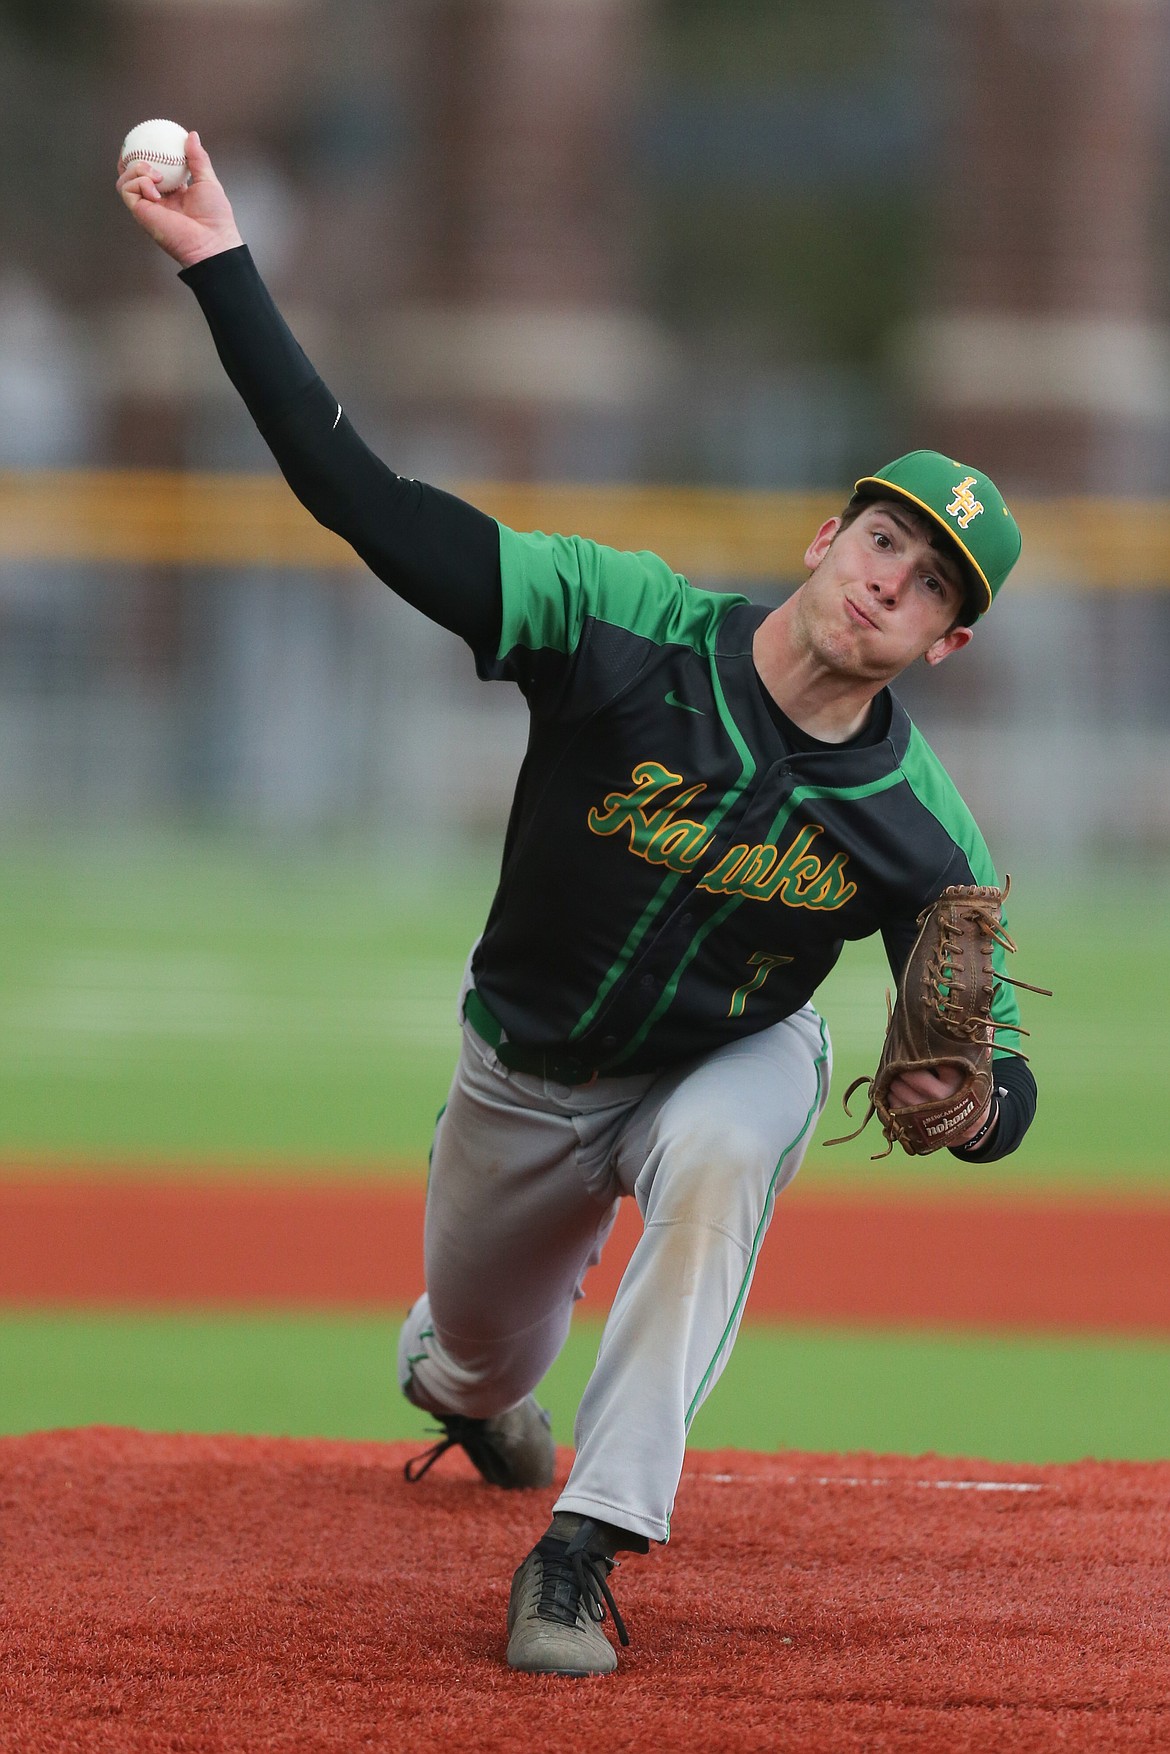 Photo by JASON DUCHOW PHOTOGRAPHY
Lakeland's Cole Strietzel throws a pitch during the second game of Thursday's doubleheader against Sandpoint at War Memorial Field.